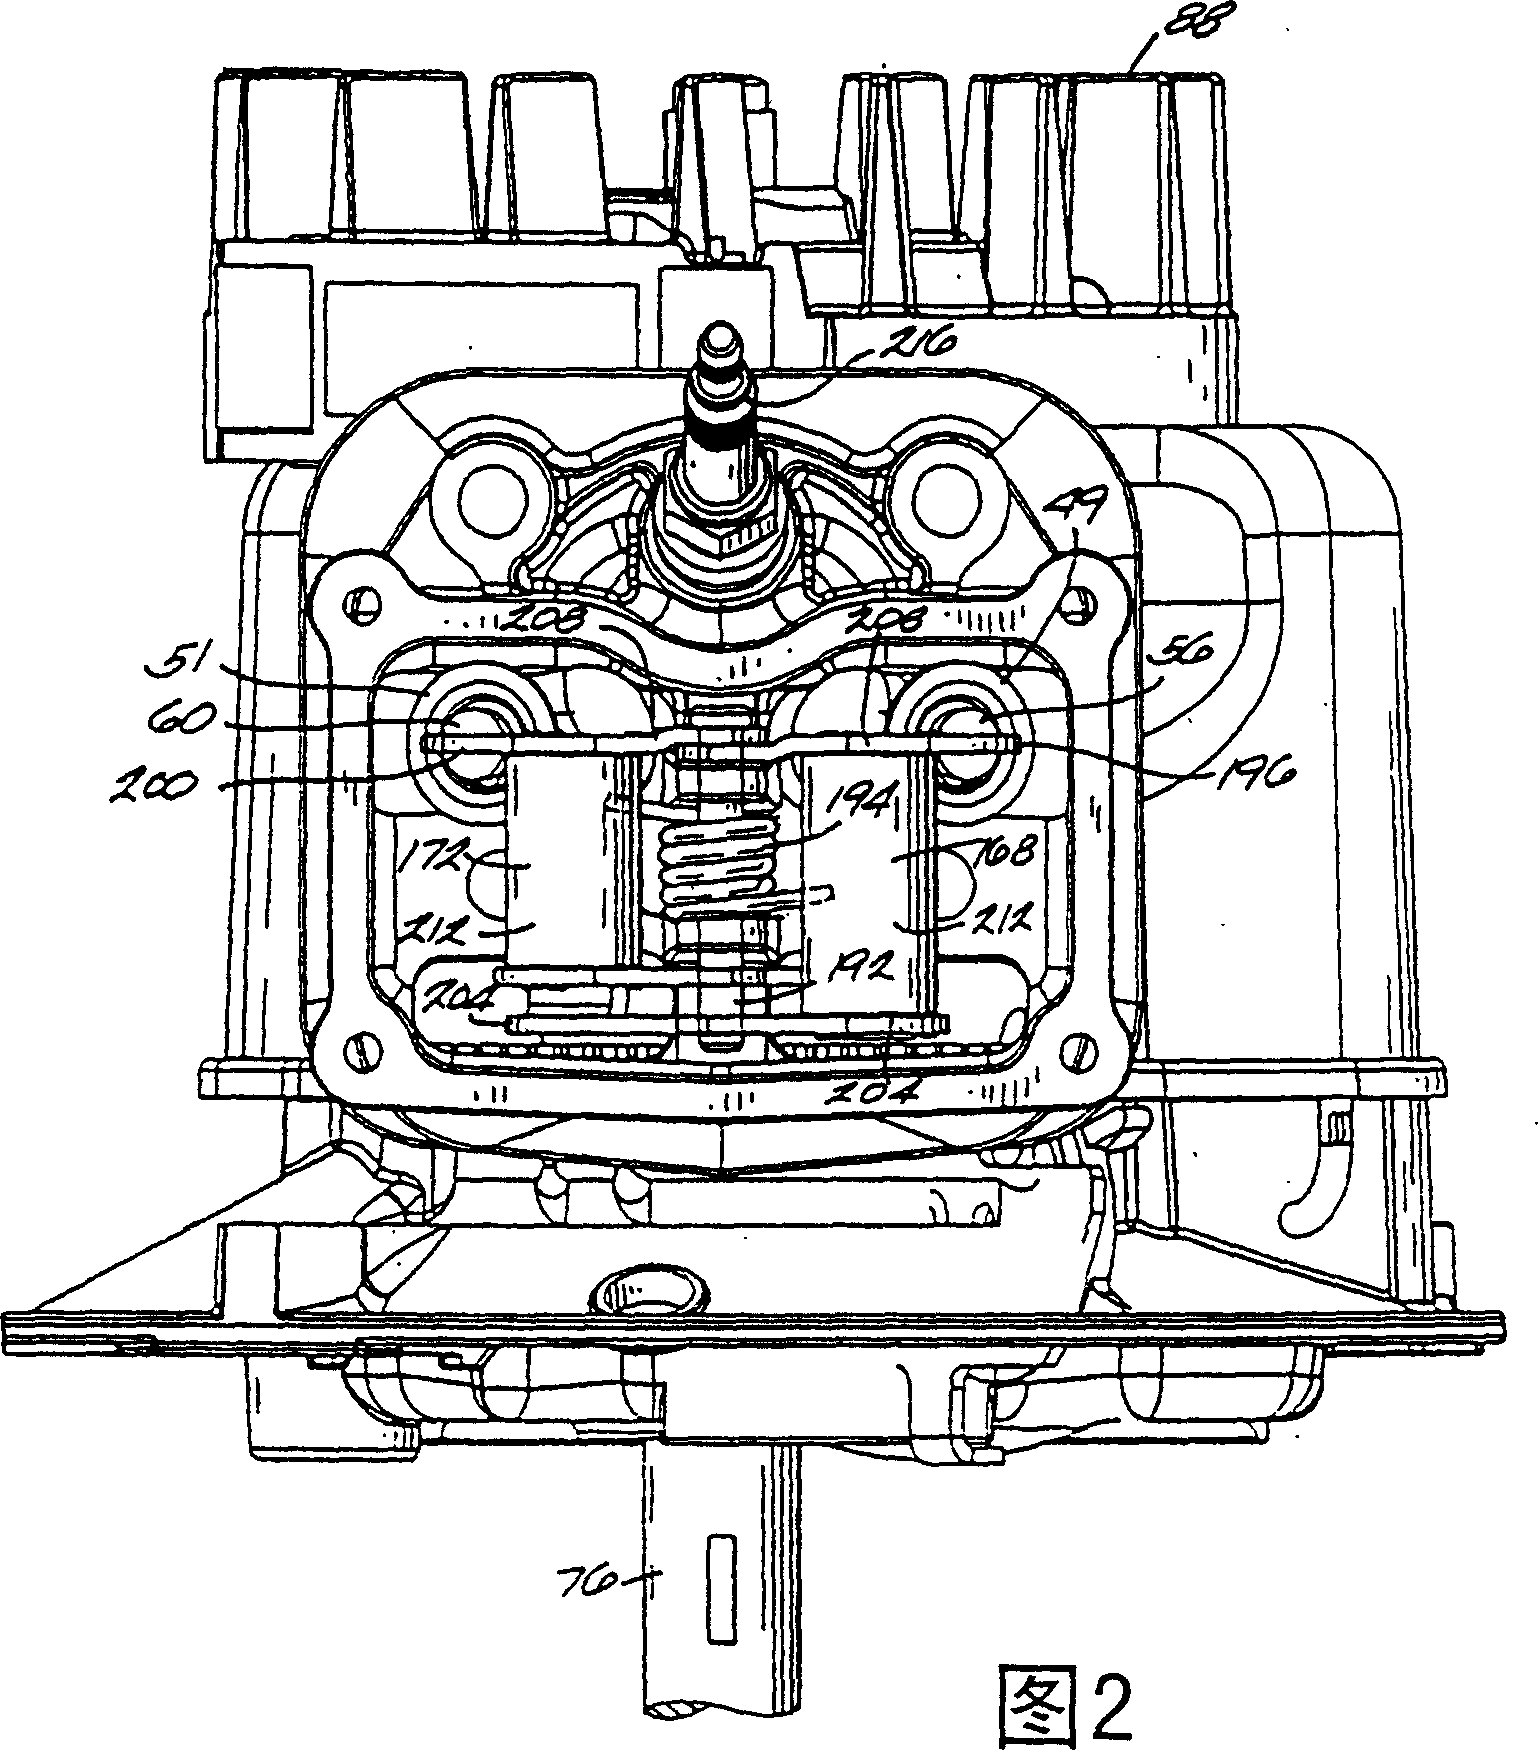 Direct lever overhead valve system